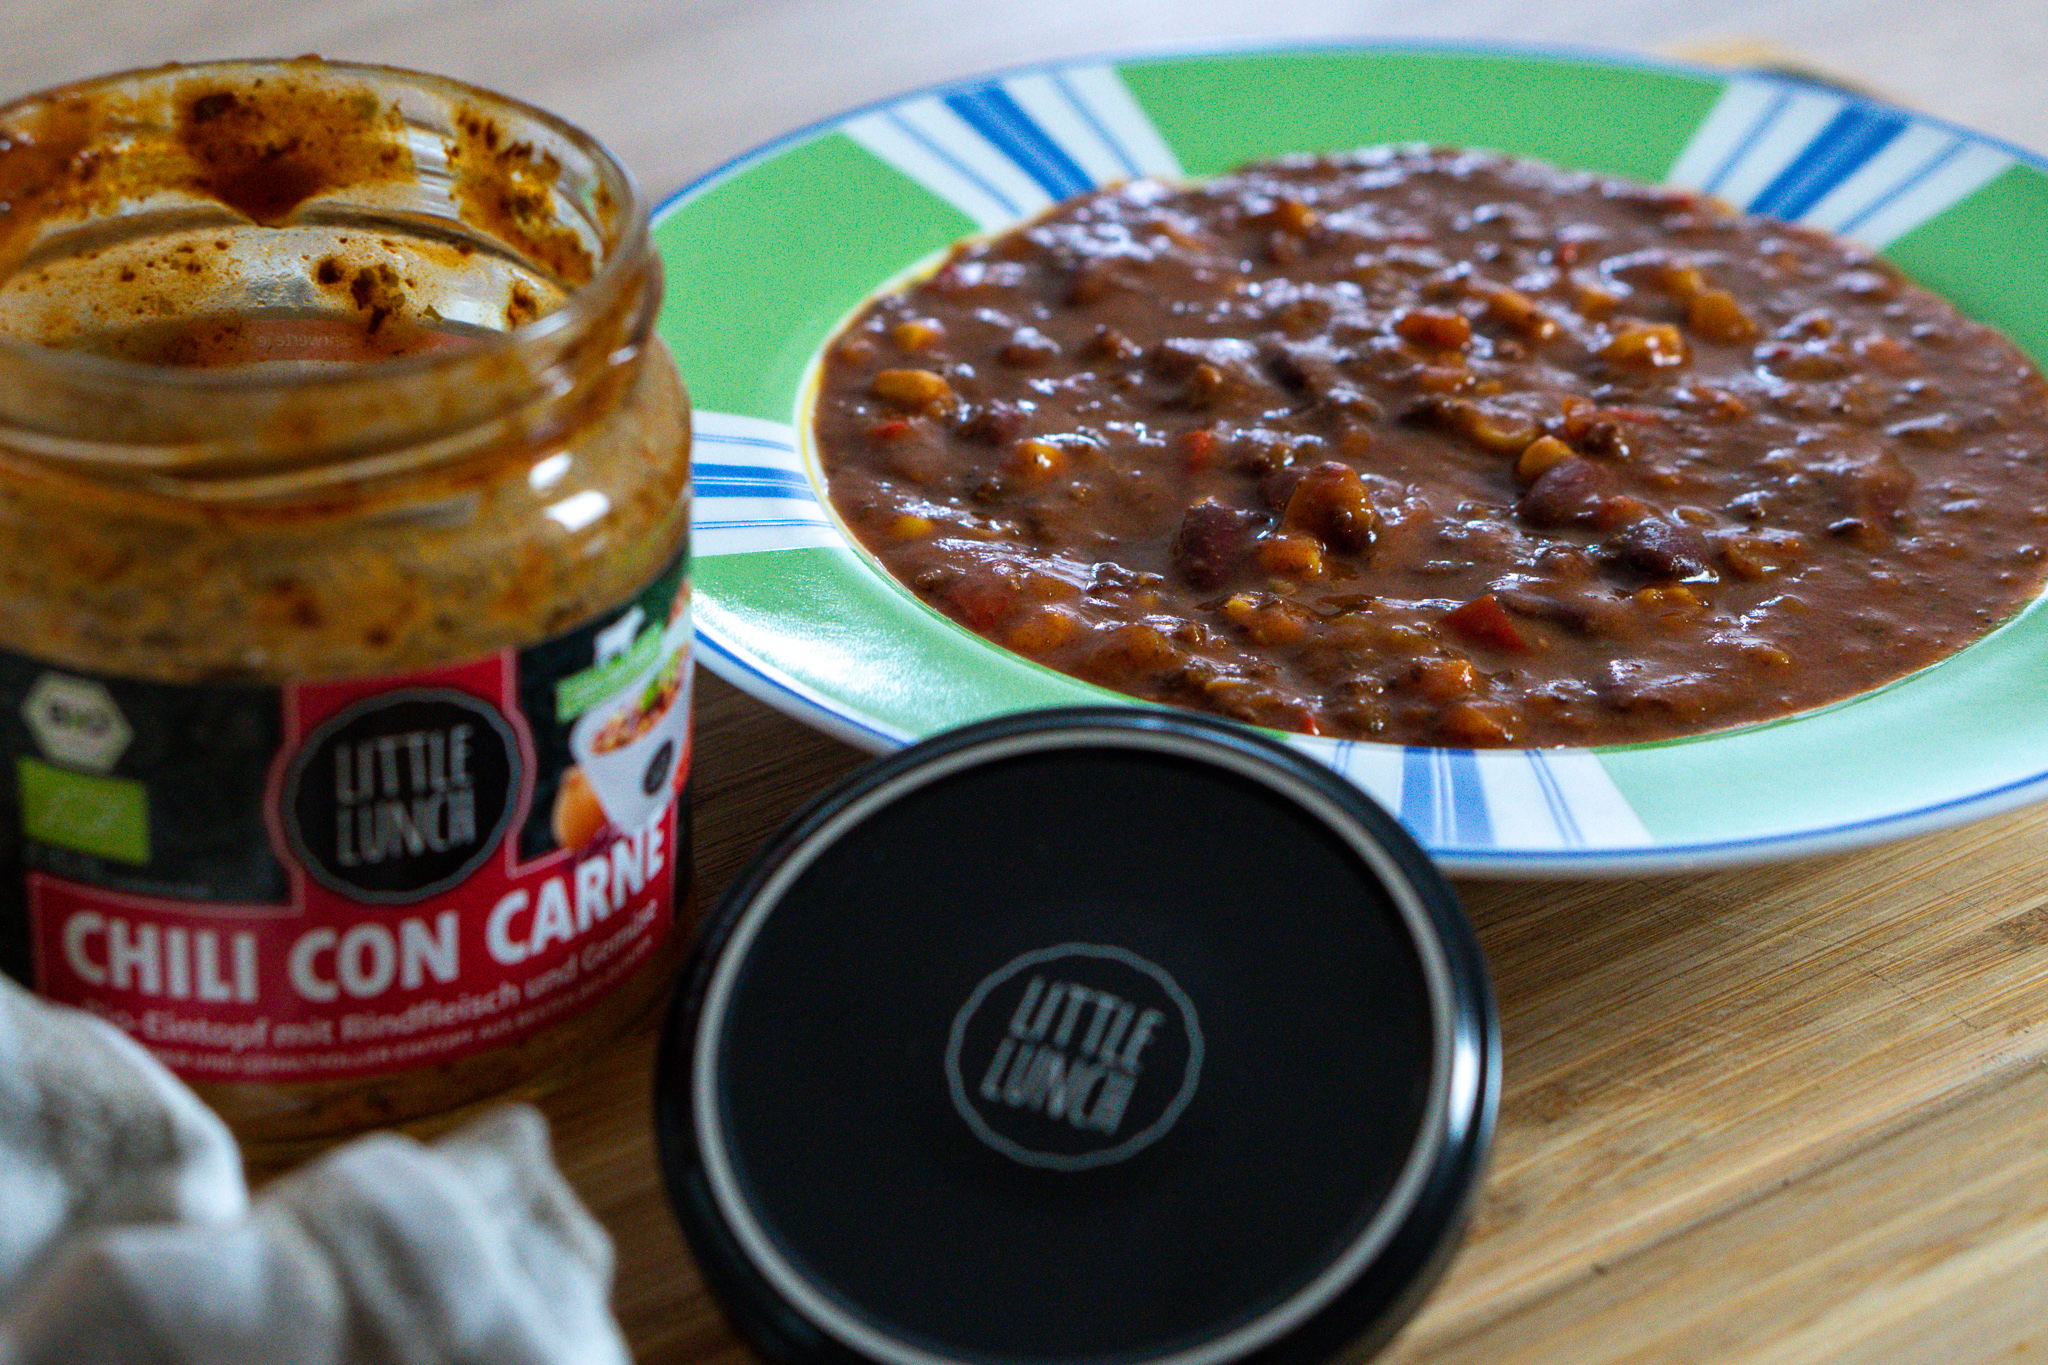 Little Lunch Chili Con Carne